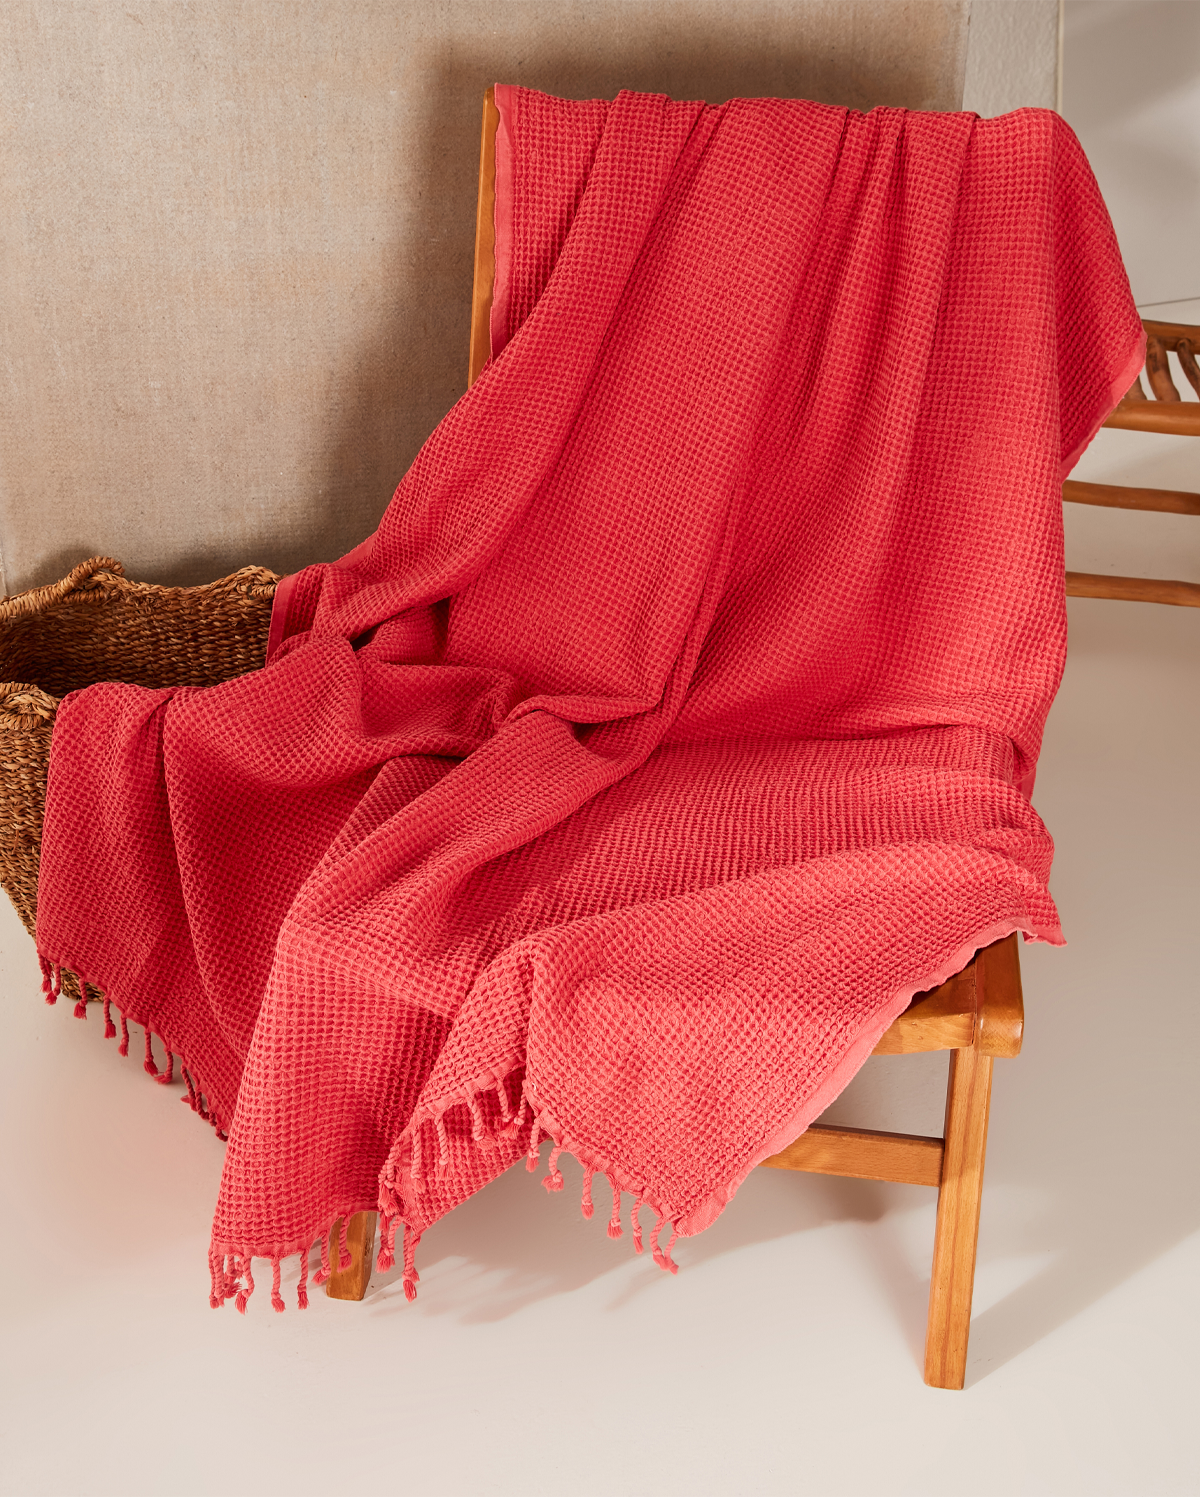 Waffle Cotton Blanket - Red